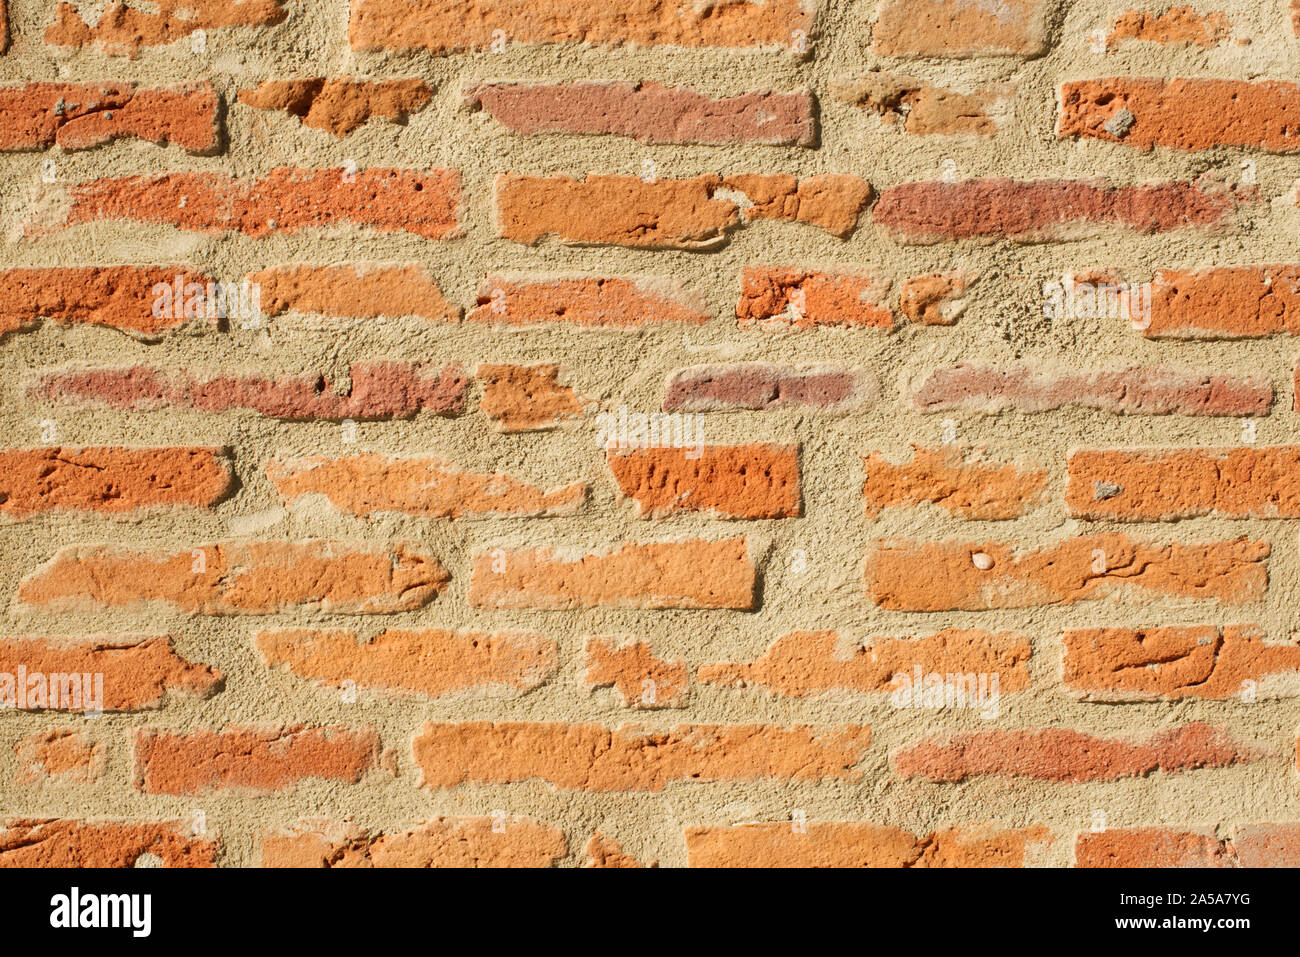 Part of a wall constructed of old, red and orange bricks. Landscape oriented background with a lot of copy space. Stock Photo